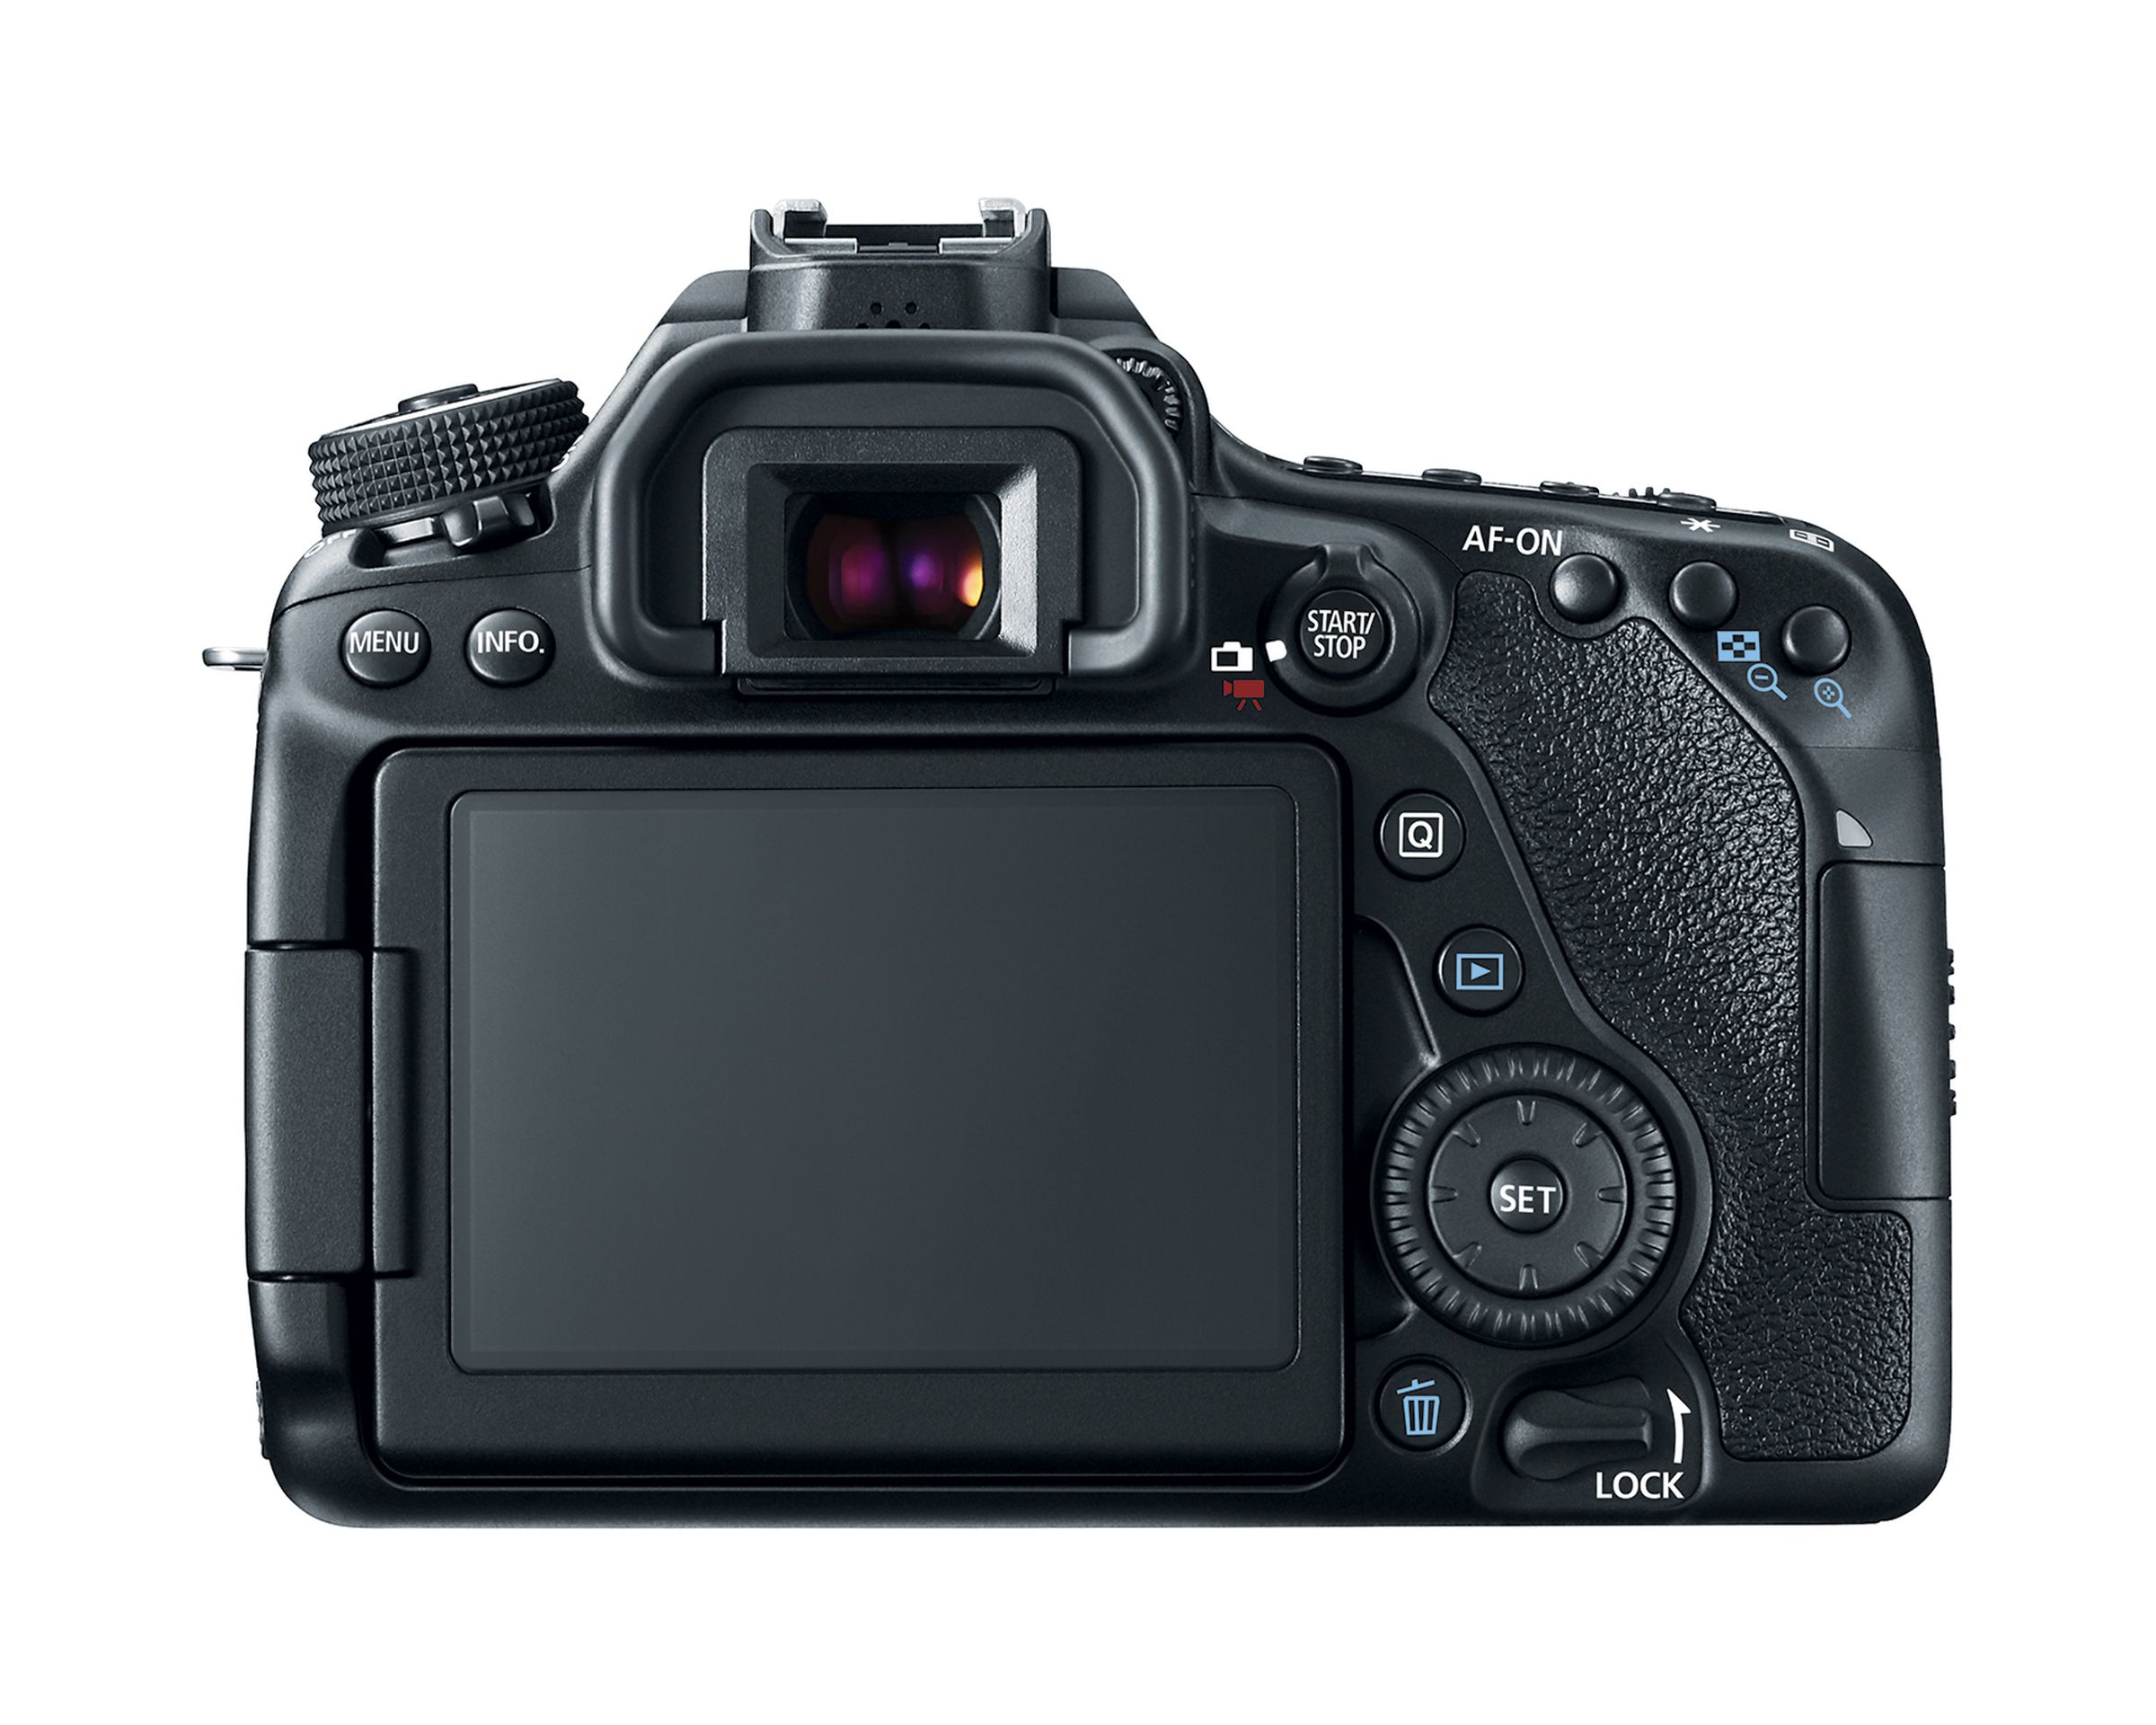 Canon 80D and accessories photos